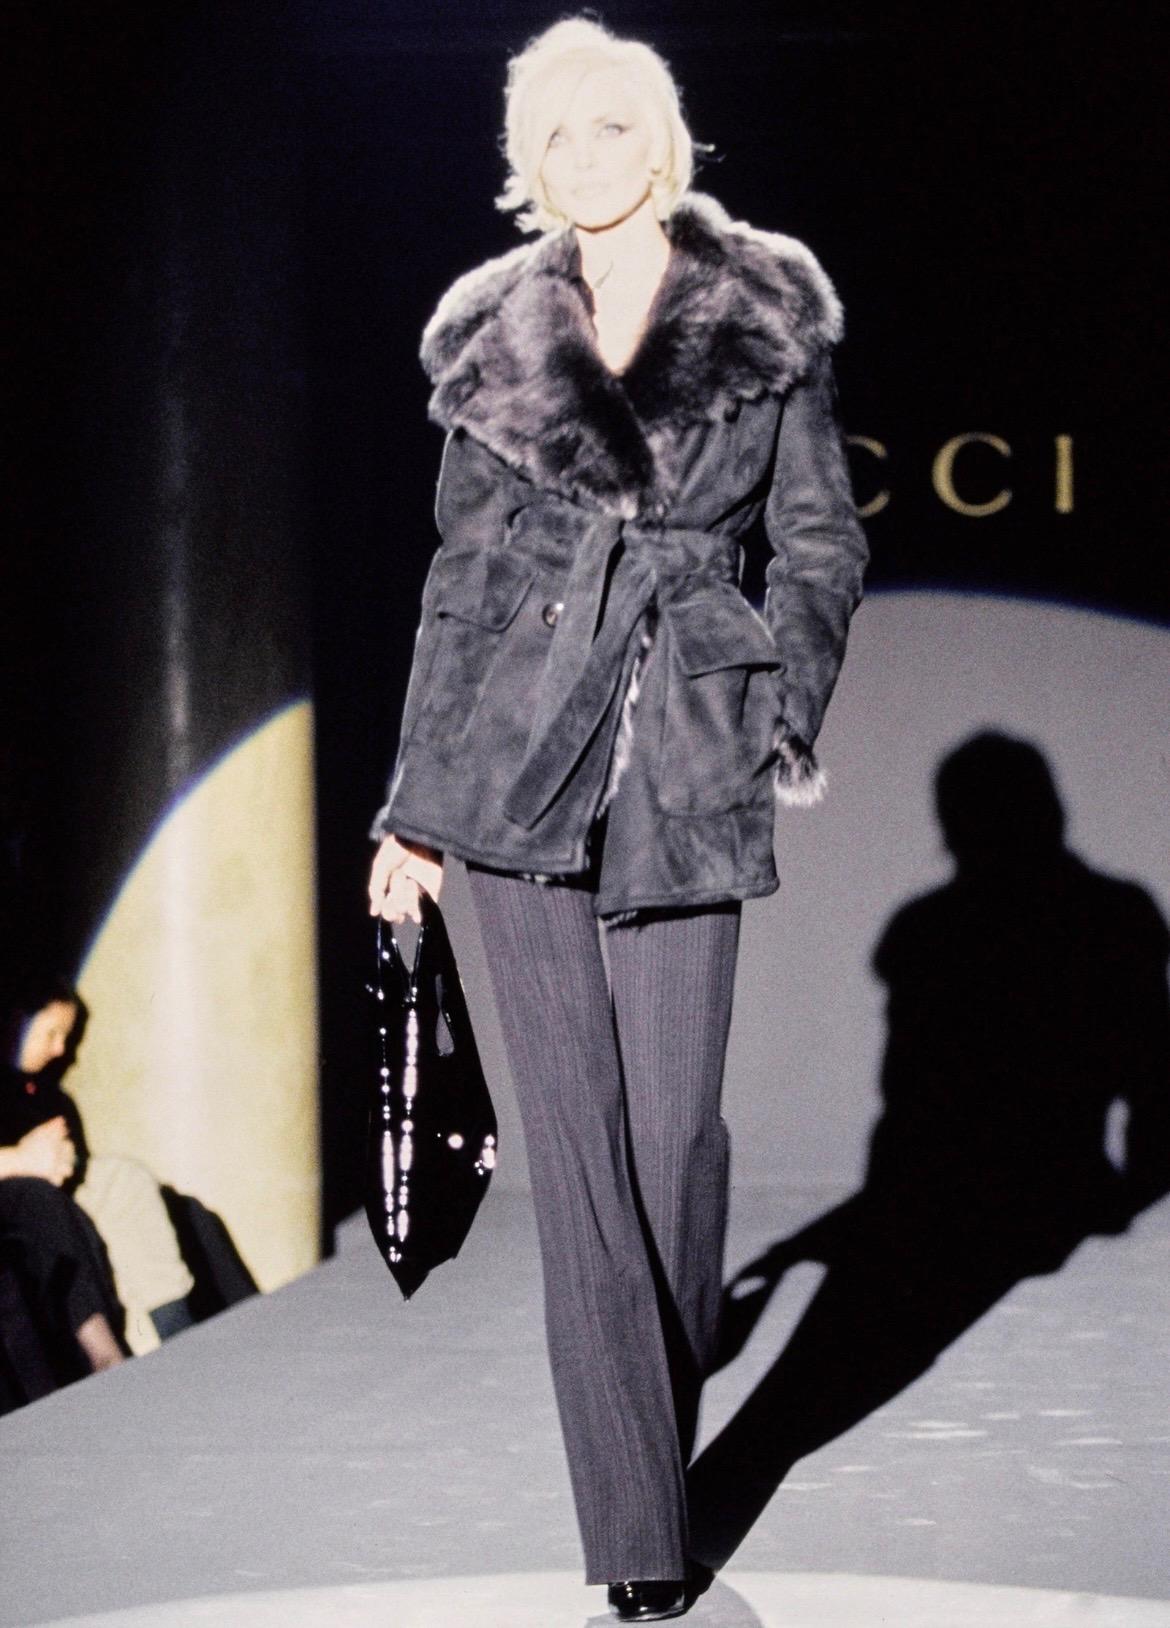 Presenting a fabulous black shearling suede Gucci coat, designed by Tom Ford. From the Fall/Winter 1995 collection, this coat debuted on the season's runway as part of look 17, modeled by Nadja Auermann. Constructed entirely of shearling suede, the